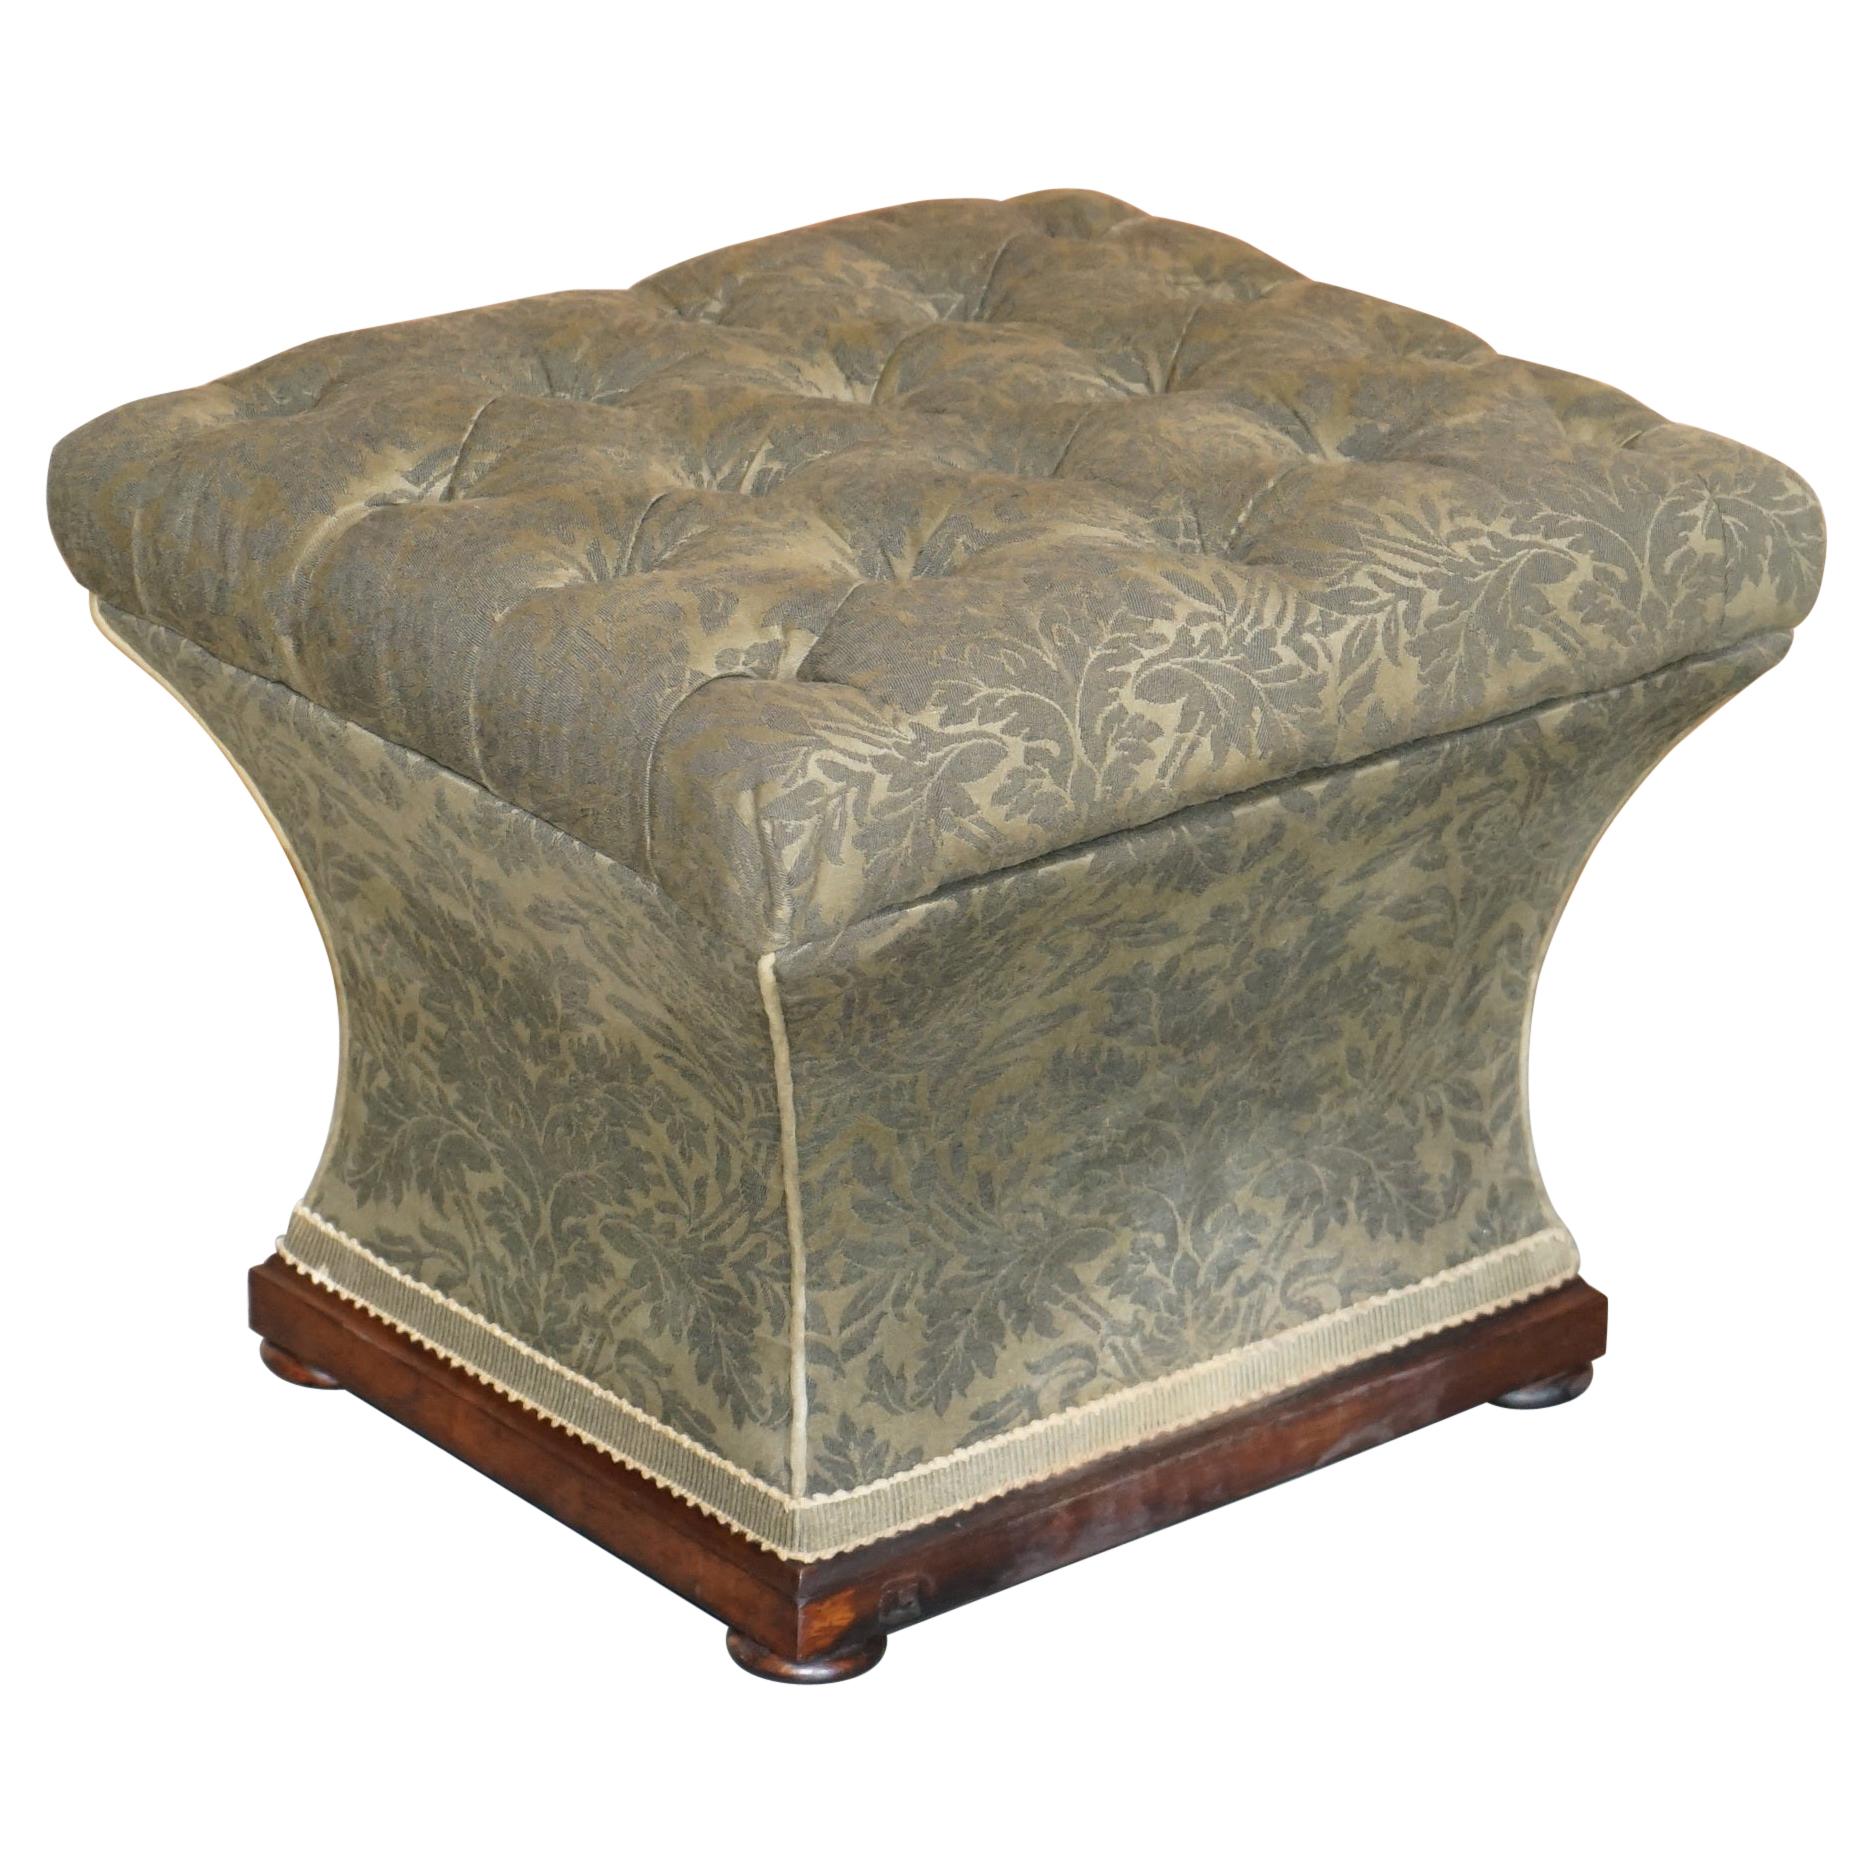 Exquisite Upholstered Victorian circa 1860 Ottoman Stool Footstool with Storage